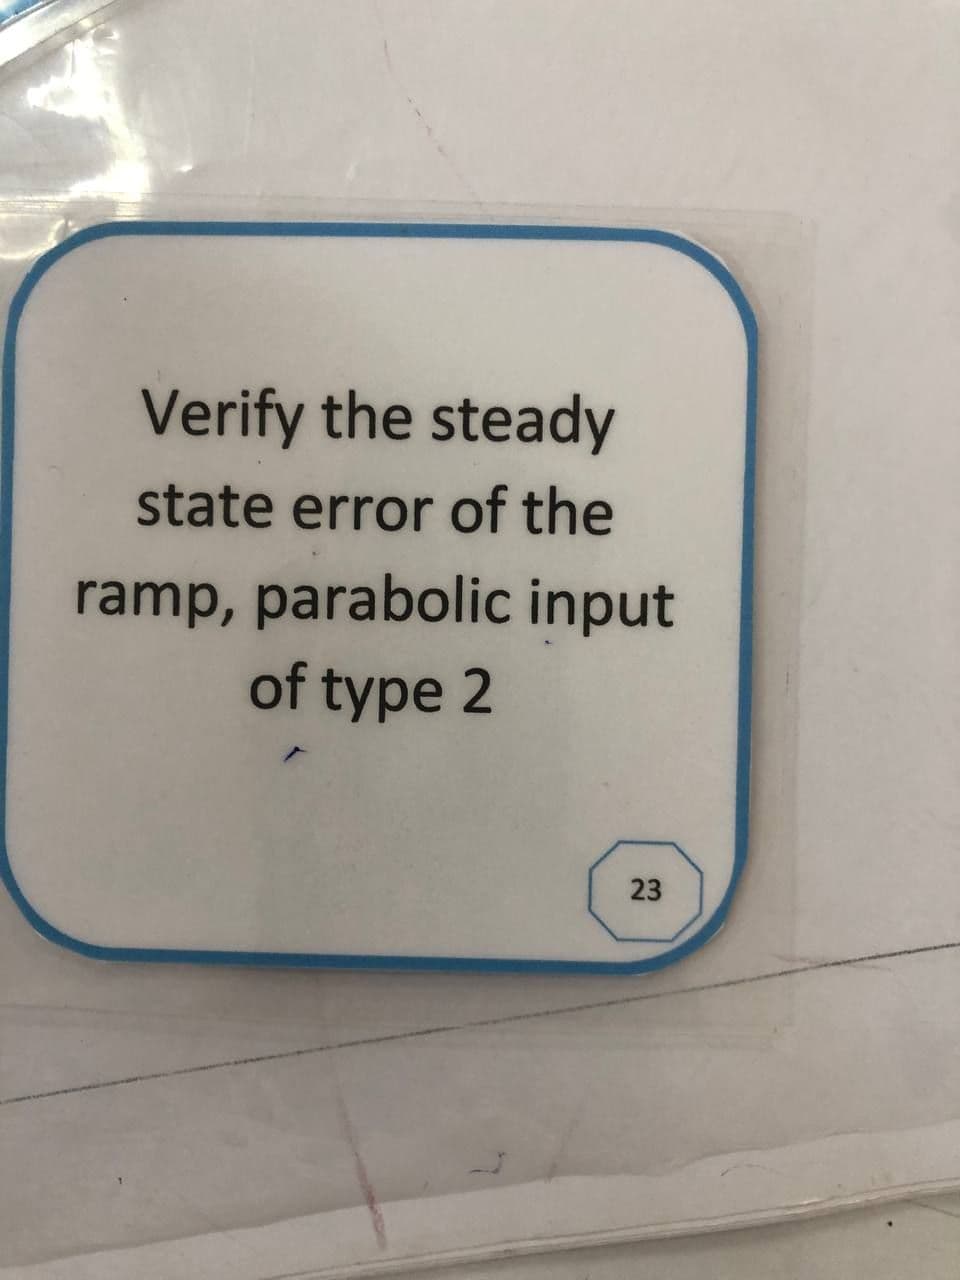 Verify the steady
state error of the
ramp, parabolic input
of type 2
23